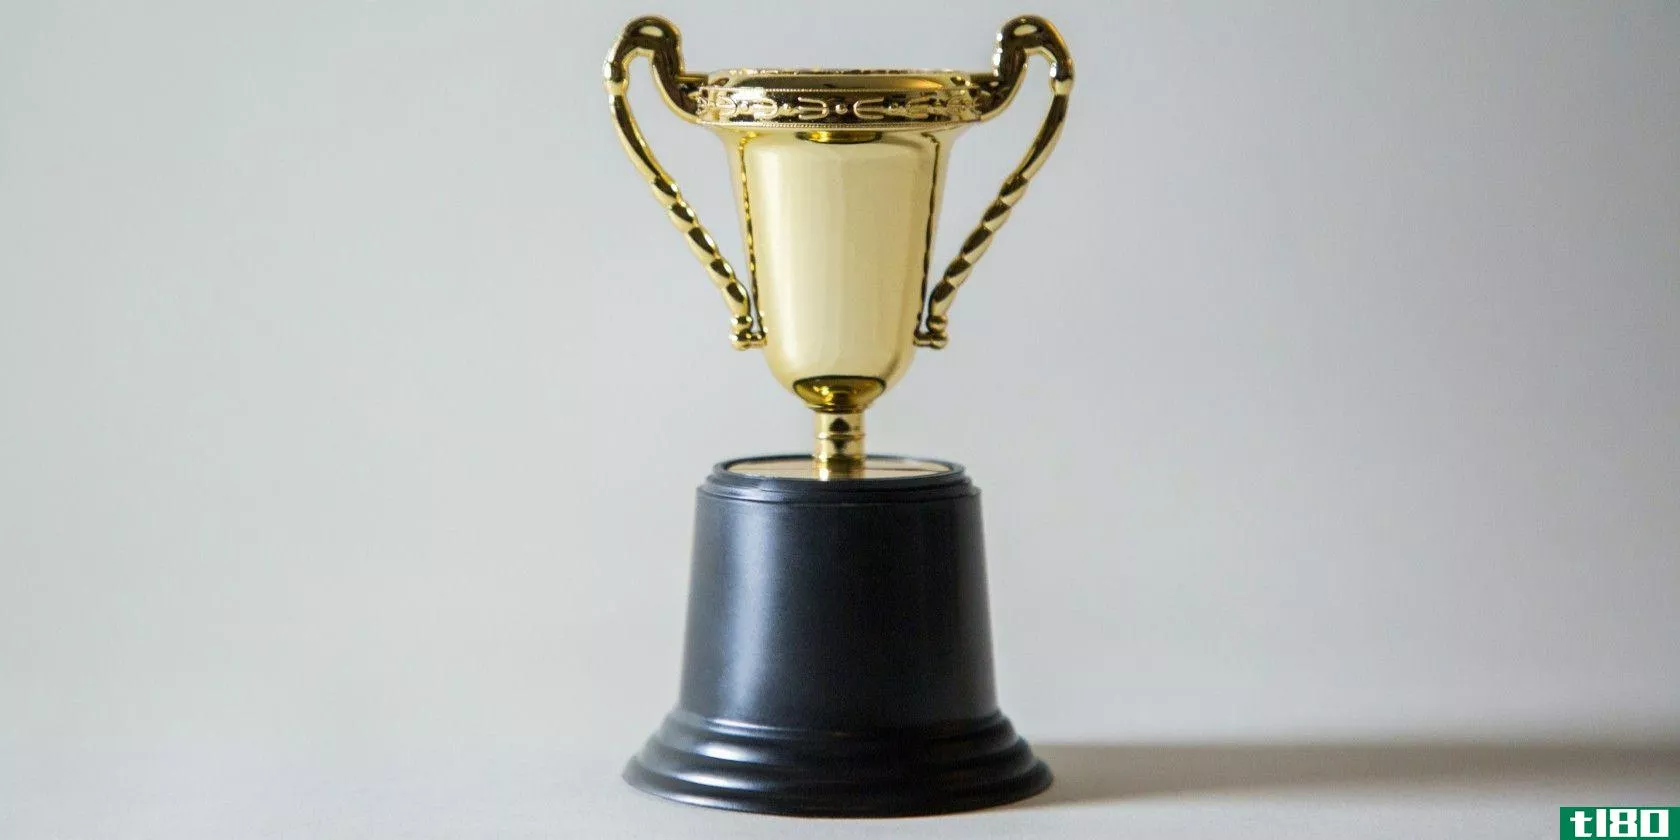 world-record-sites-trophy-featured